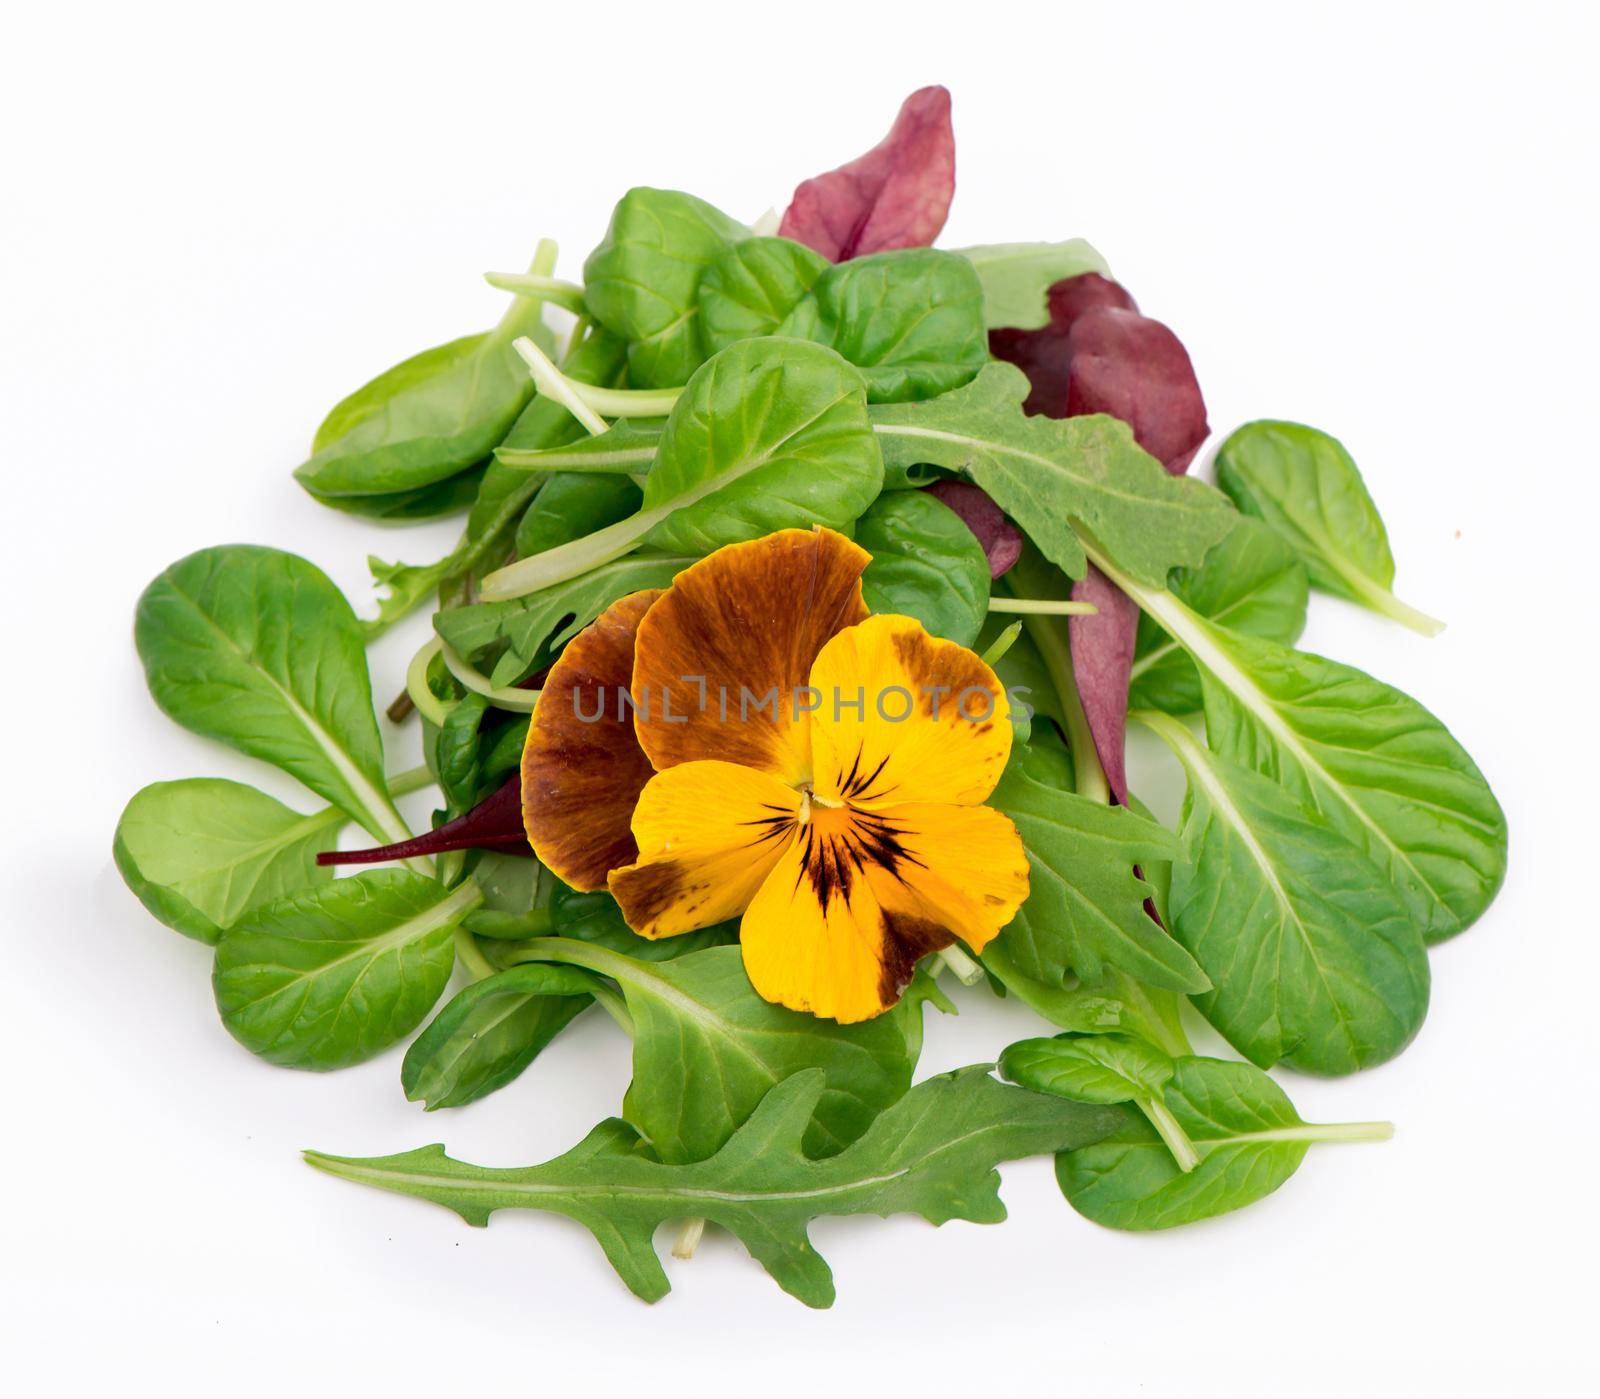 mix salad with arugula spinach salad red and edible flowers on a white background by aprilphoto